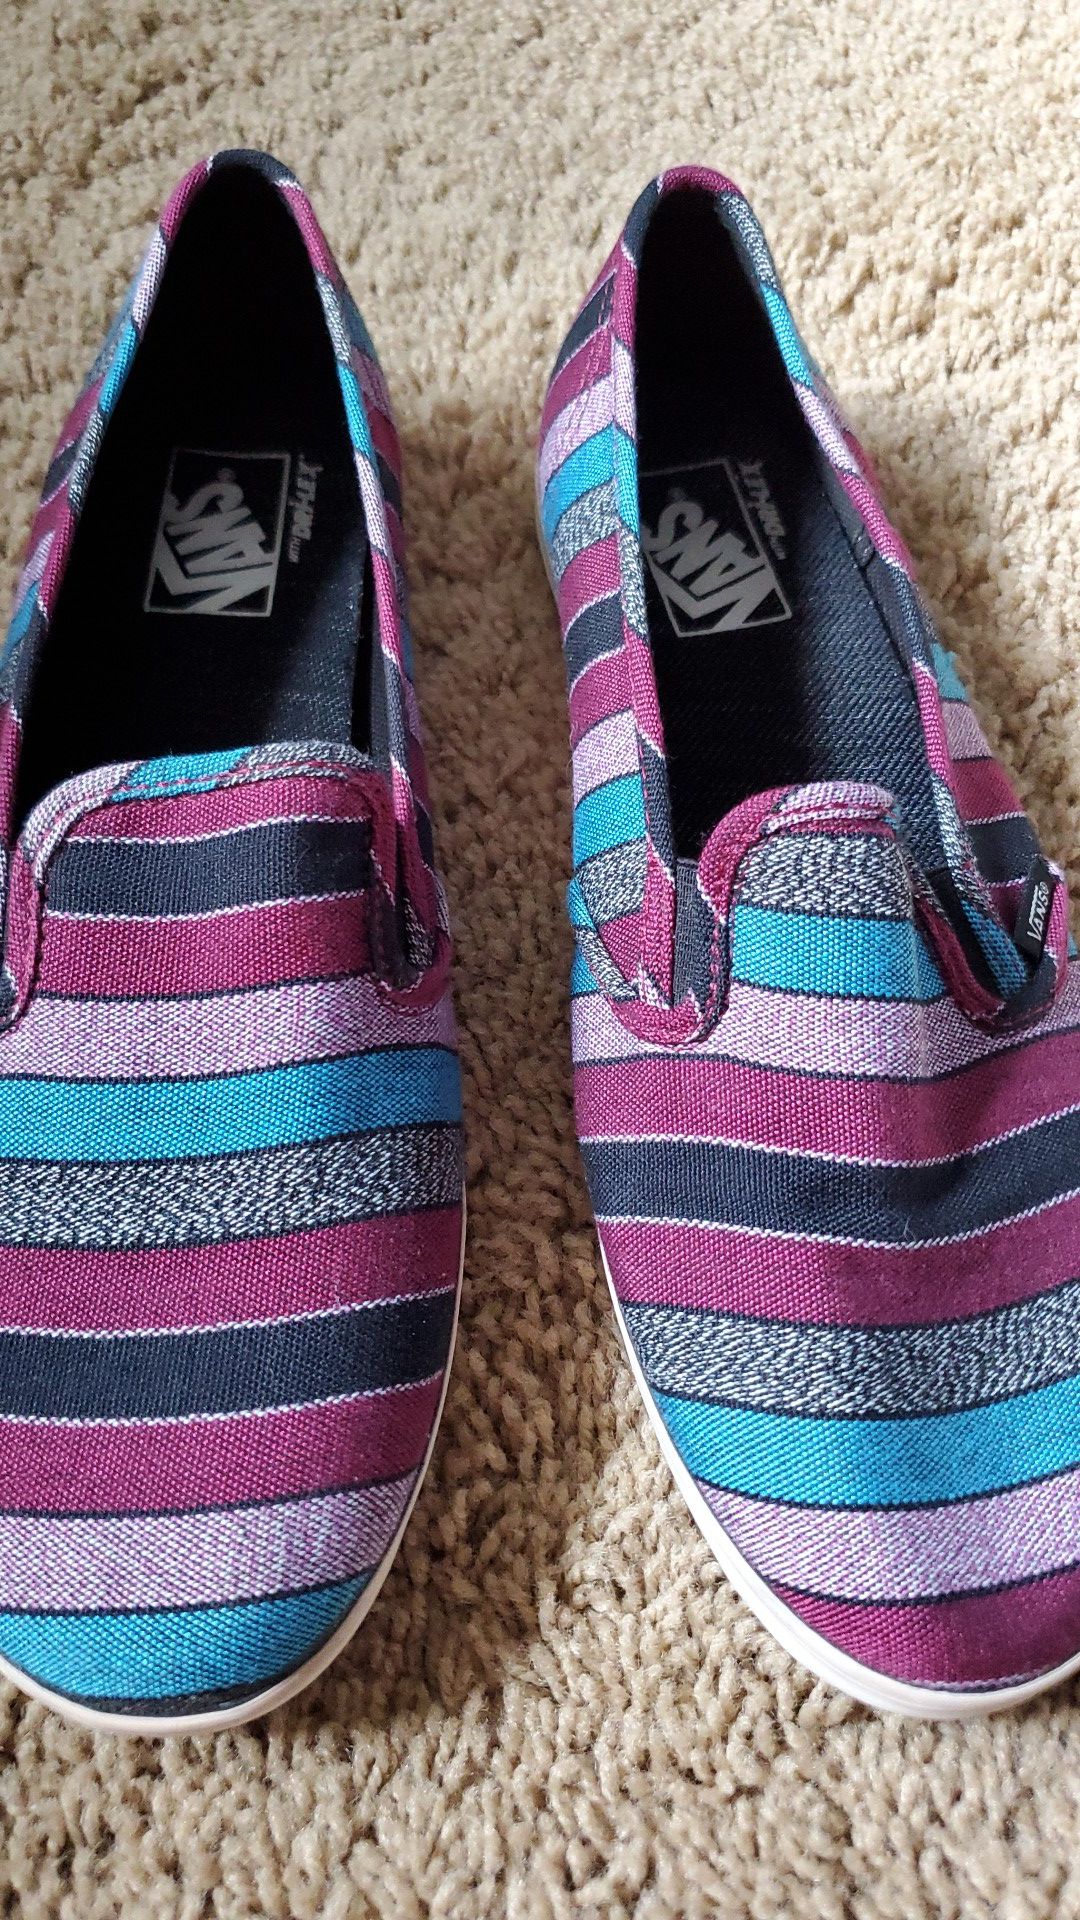 Striped purple and blue low top women's VANS size 10.5